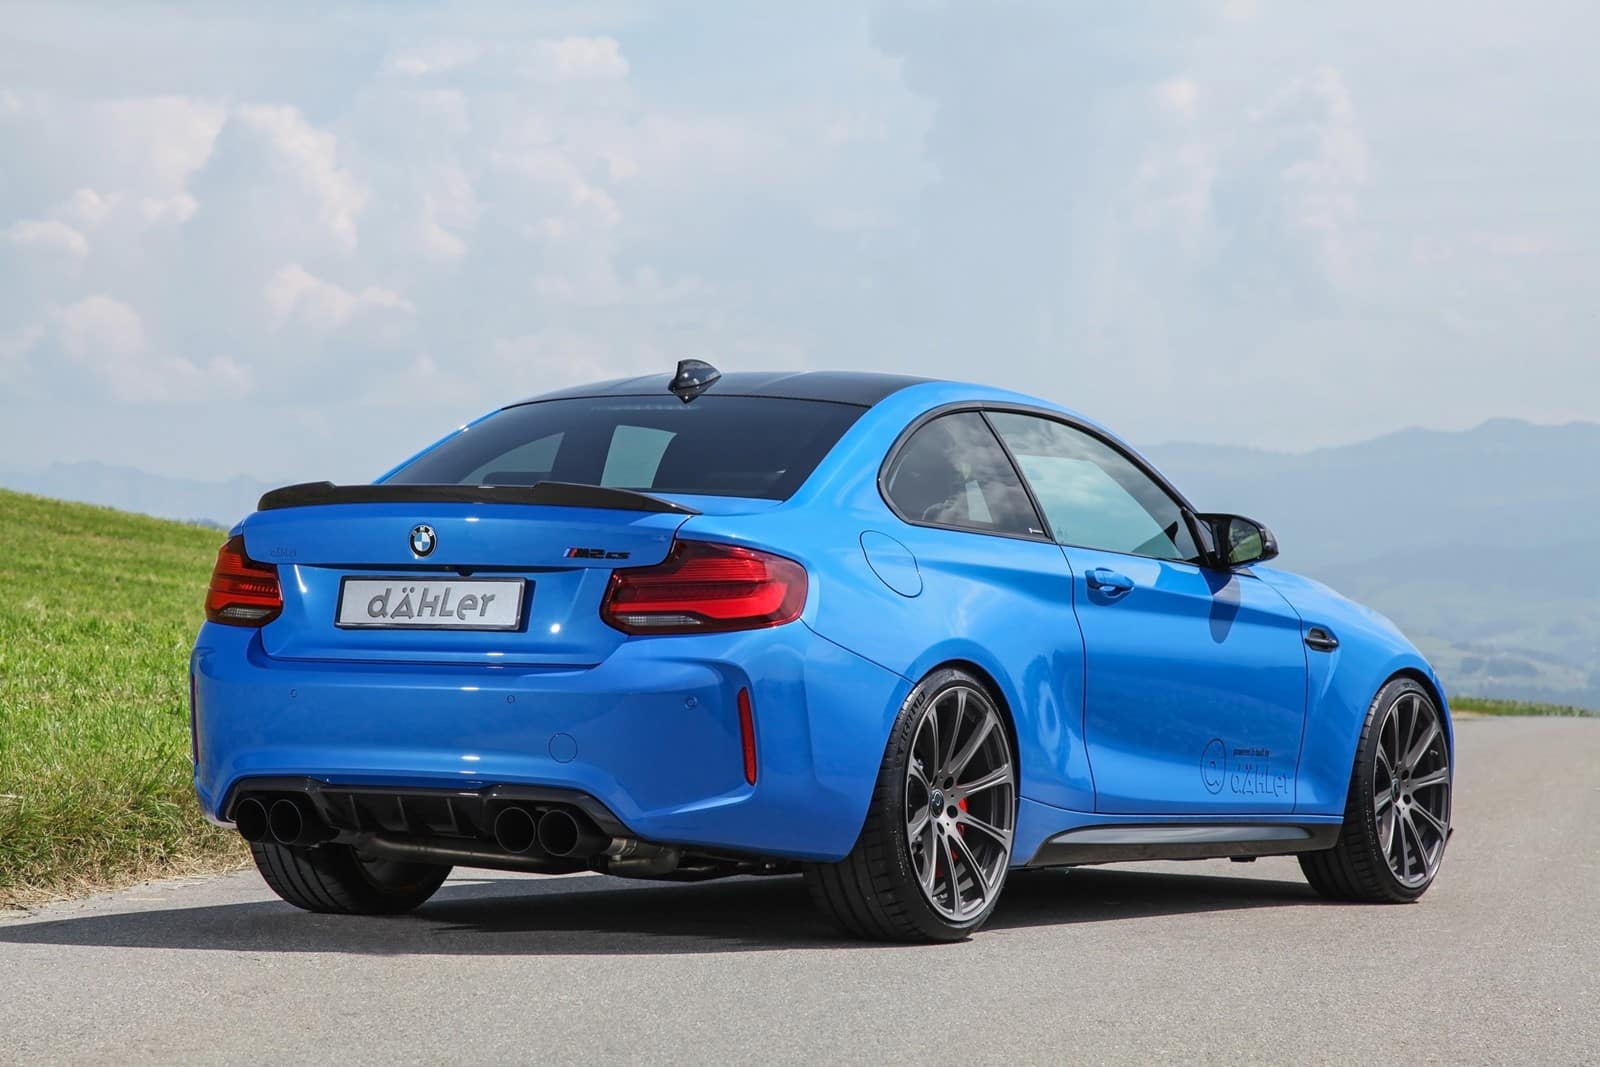 If the BMW M2 CS knows you little, you can opt for this version with an extra 100 hp